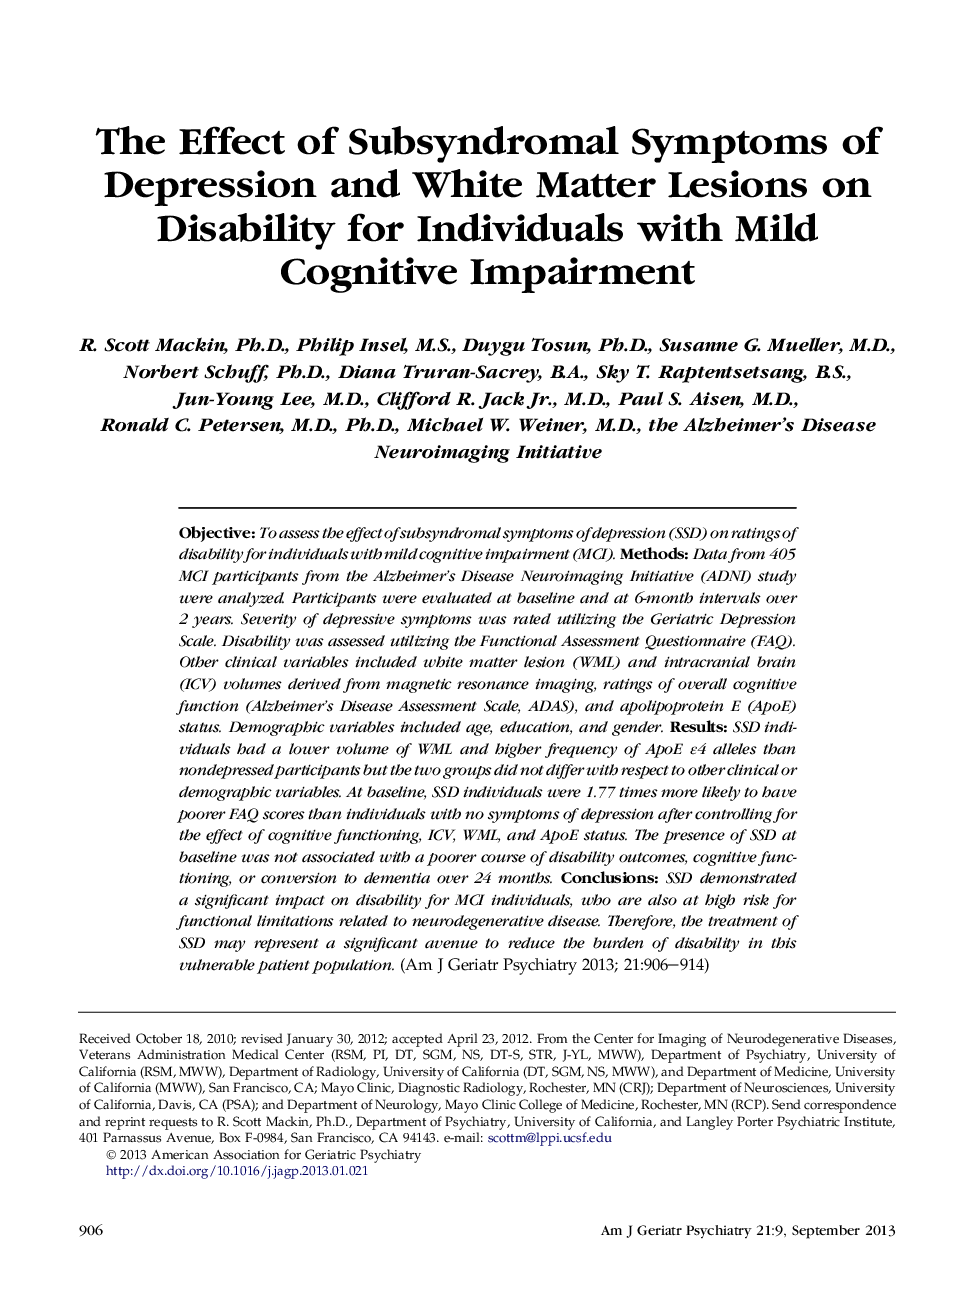 The Effect of Subsyndromal Symptoms of Depression and White Matter Lesions on Disability for Individuals with Mild Cognitive Impairment